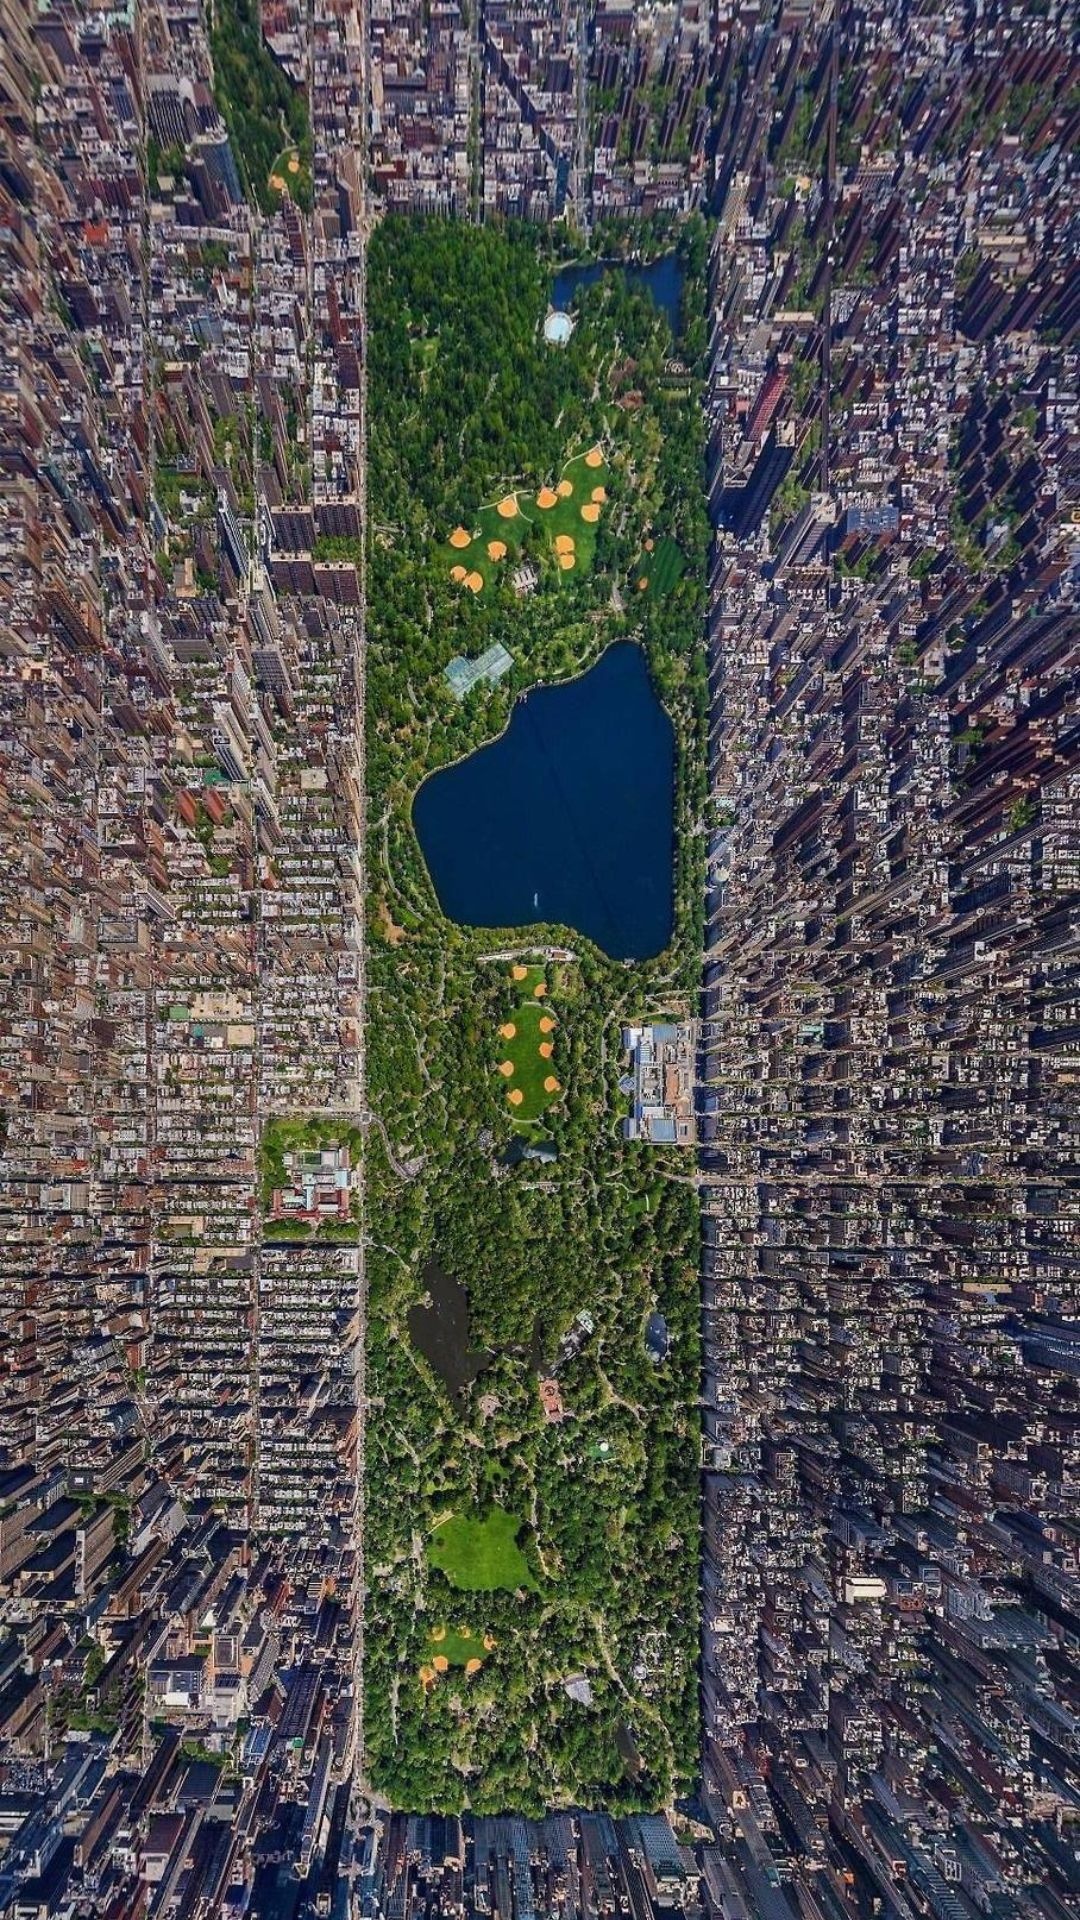 Central Park: Home to dozens of attractions like bike trails, sculptures, ponds, Urban design. 1080x1920 Full HD Wallpaper.